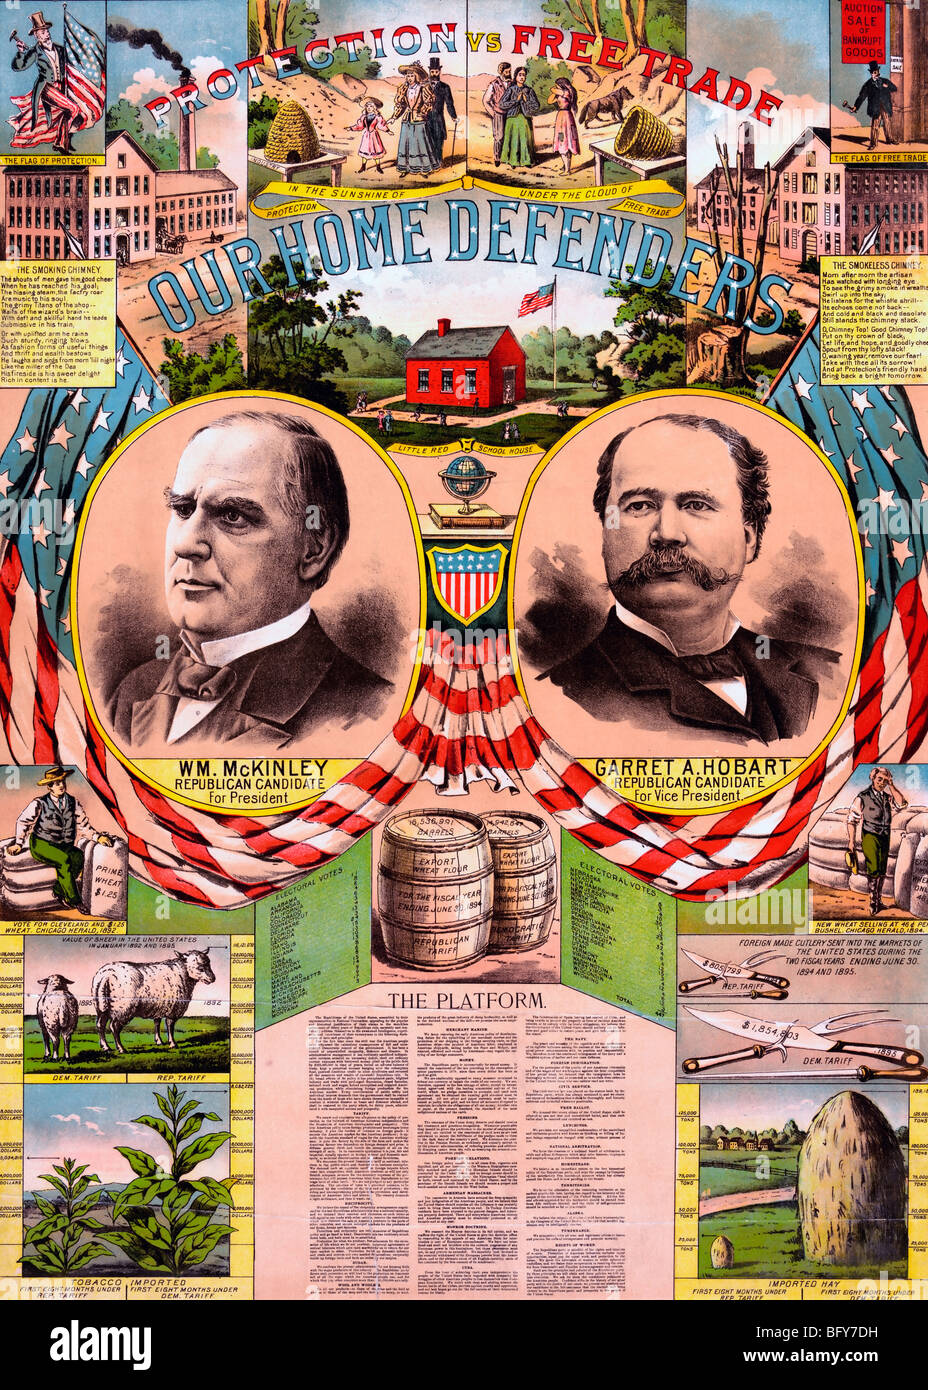 Our home defenders - Presidential Campaign Ad for 1896 Election - Republicans William McKinley and Garrett Hobart Stock Photo